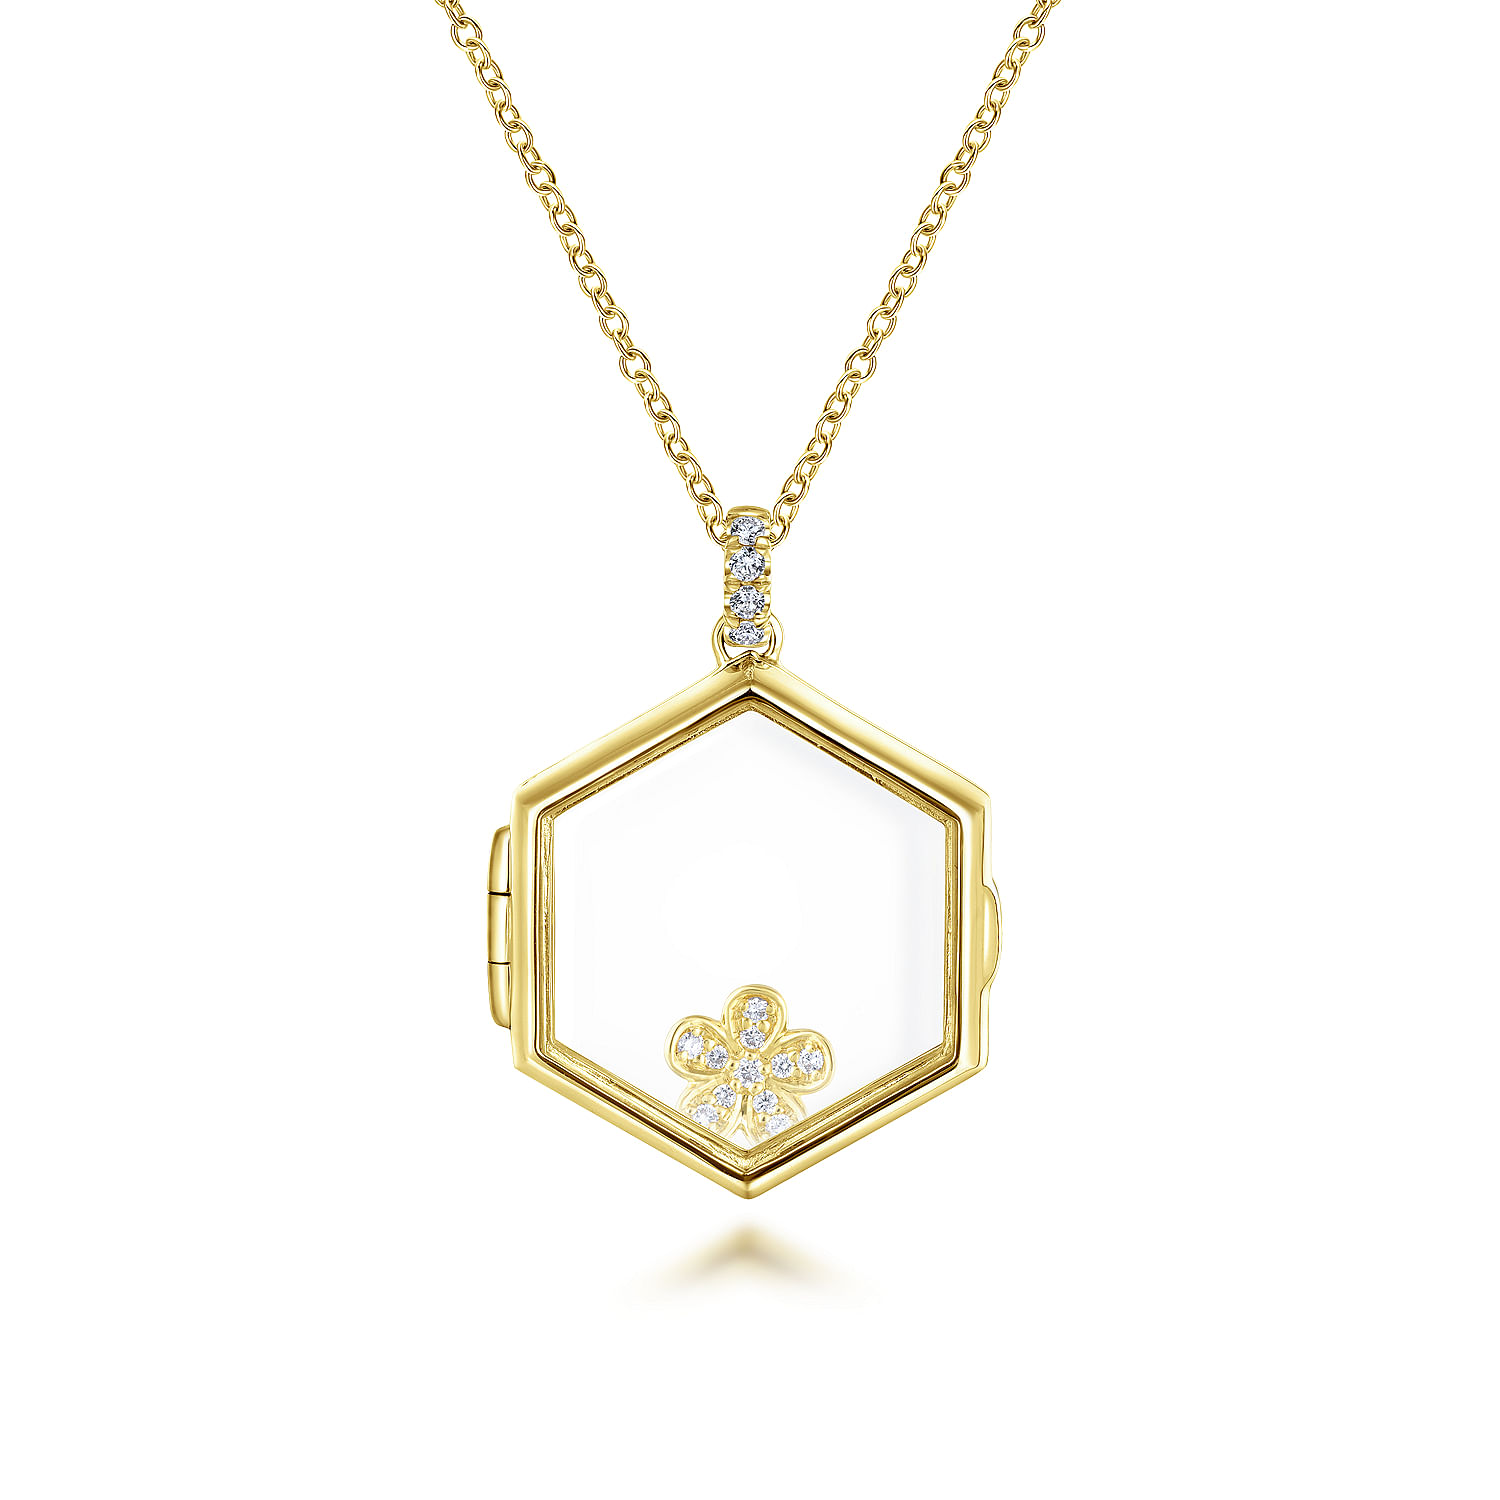 25 inch 14K Yellow Gold Hexagonal Glass Front Locket Necklace